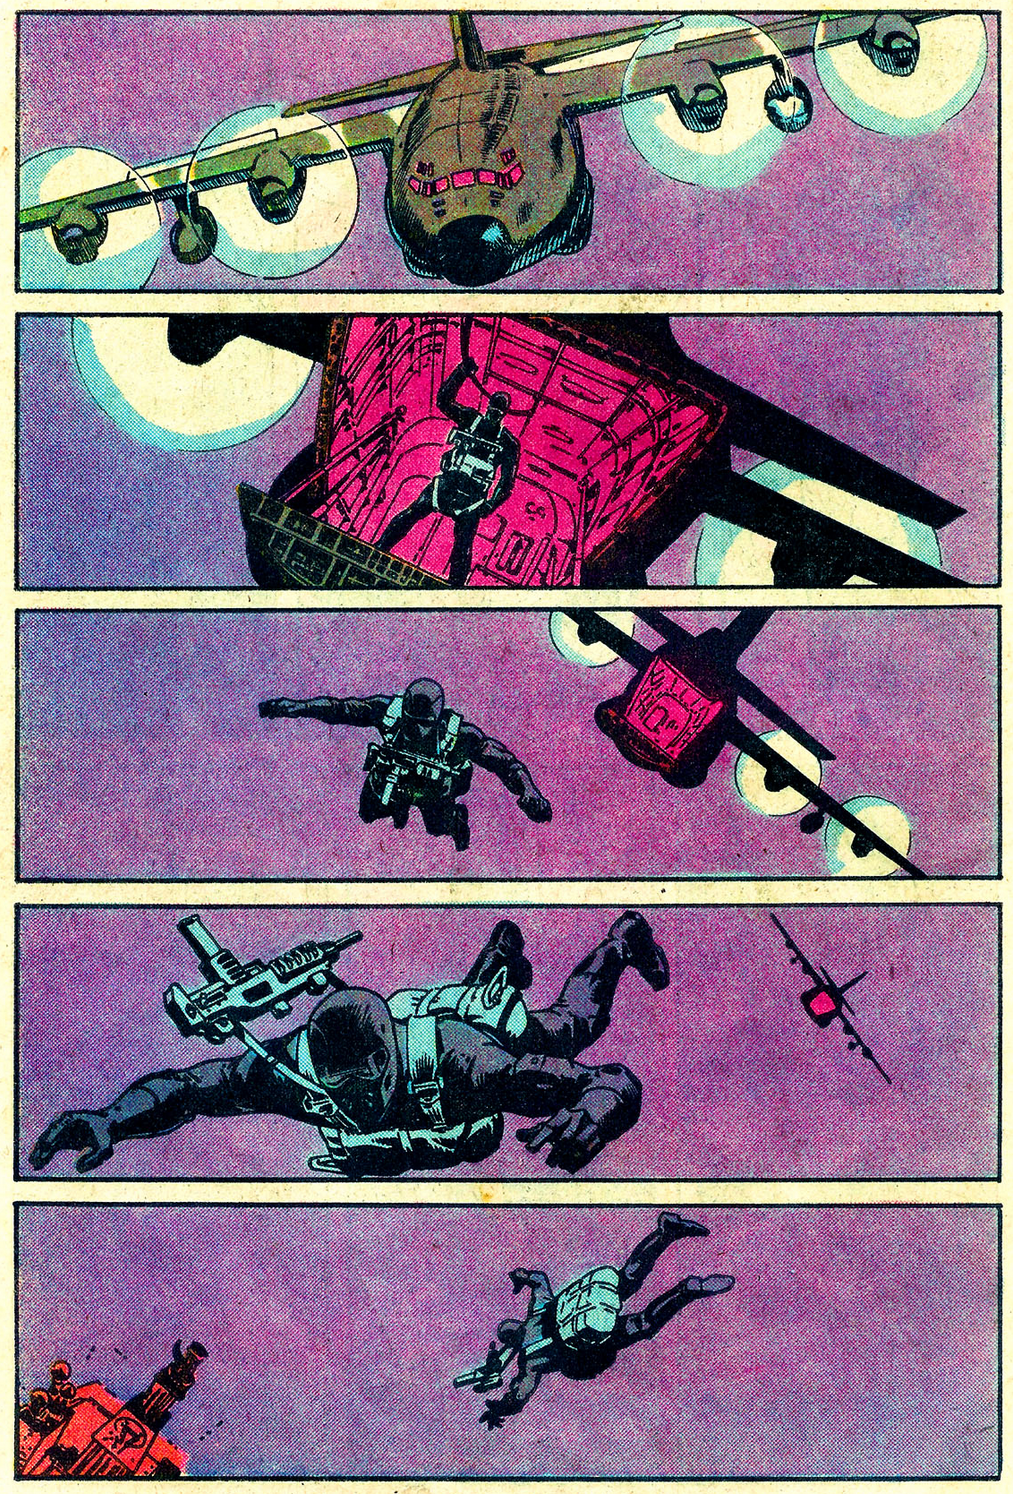 Snake-Eyes sets off on his next mission in GI Joe: A Real American Hero Vol. 1 #21 "Silent interlude" (1983), Marvel Comics. Text by Larry Hama, art by Larry Hama, Steve Leialoha, George Roussos and Rick Parker.